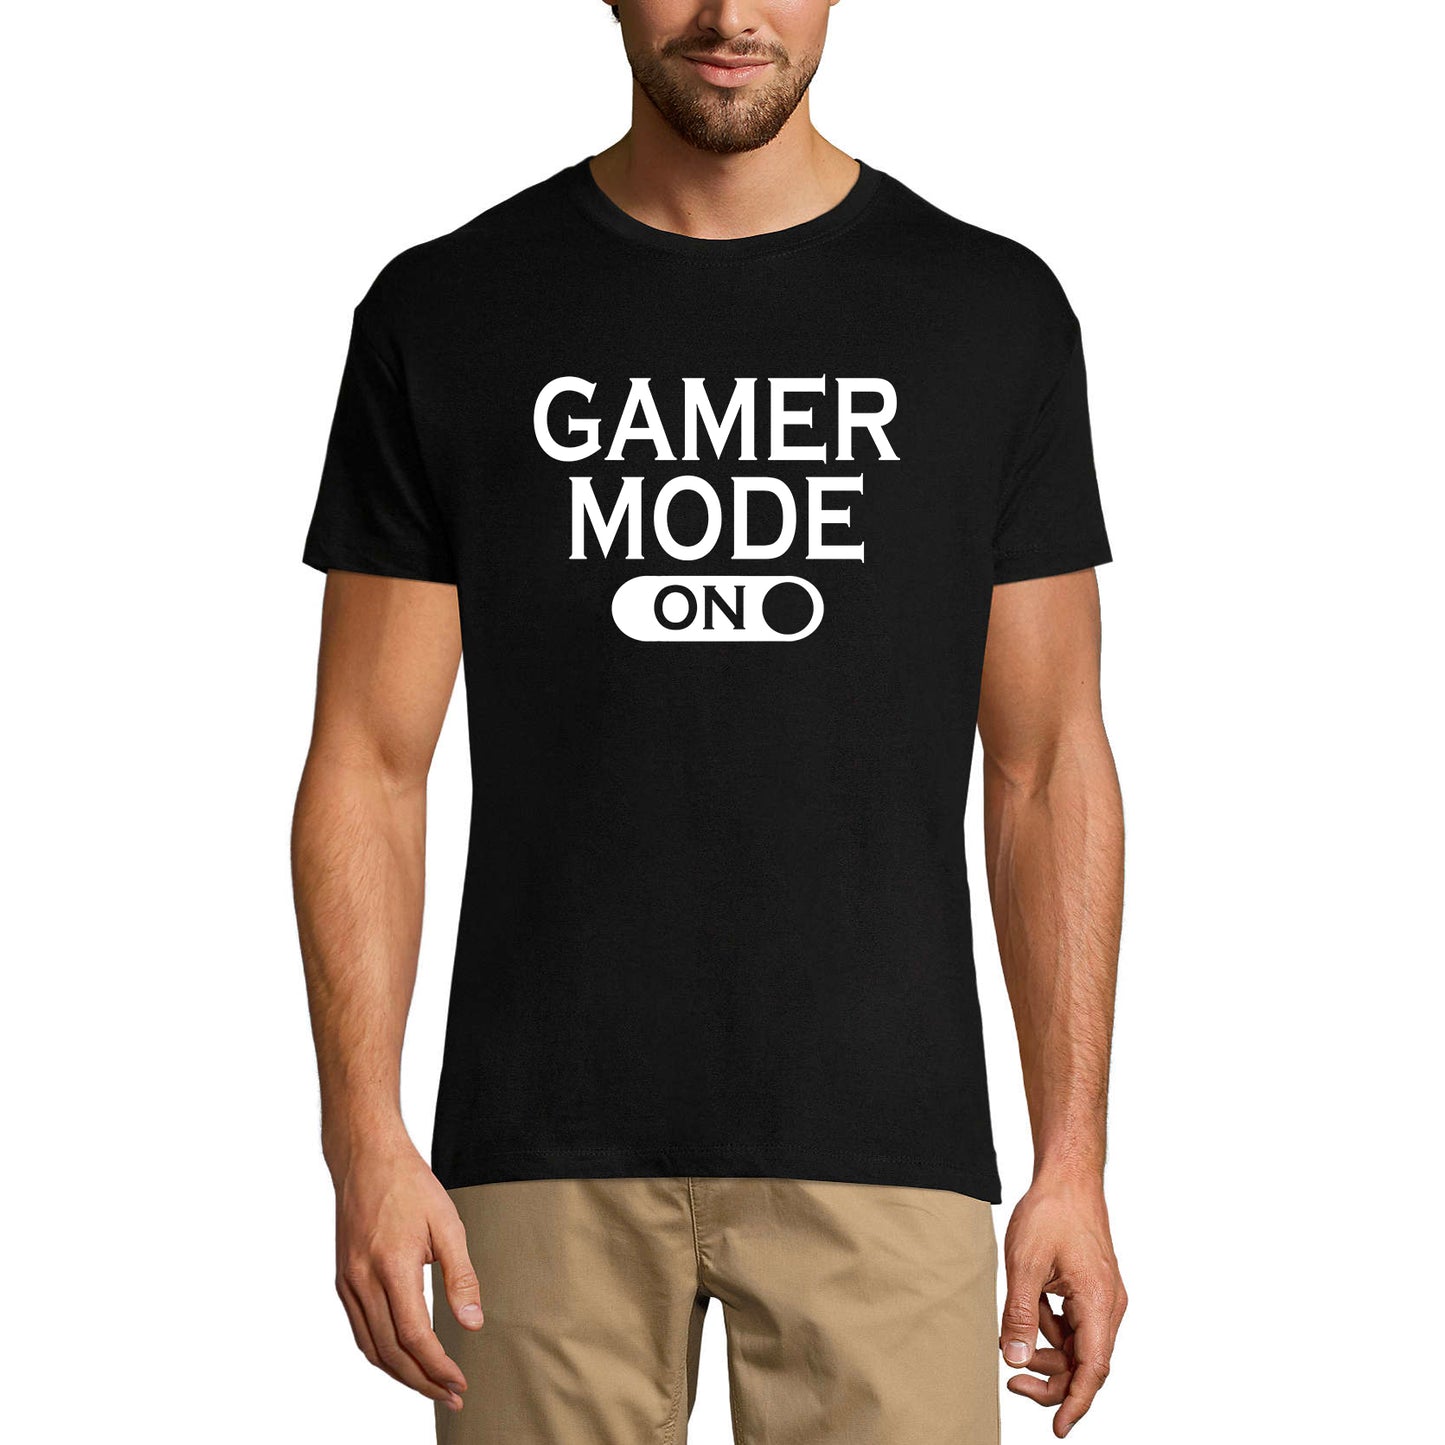 ULTRABASIC Men's Graphic Gaming T-Shirt Gamer Mode On - Funny Shirt for Player mode on level up dad gamer i paused my game alien player ufo playstation tee shirt clothes gaming apparel gifts super mario nintendo call of duty graphic tshirt video game funny geek gift for the gamer fortnite pubg humor son father birthday